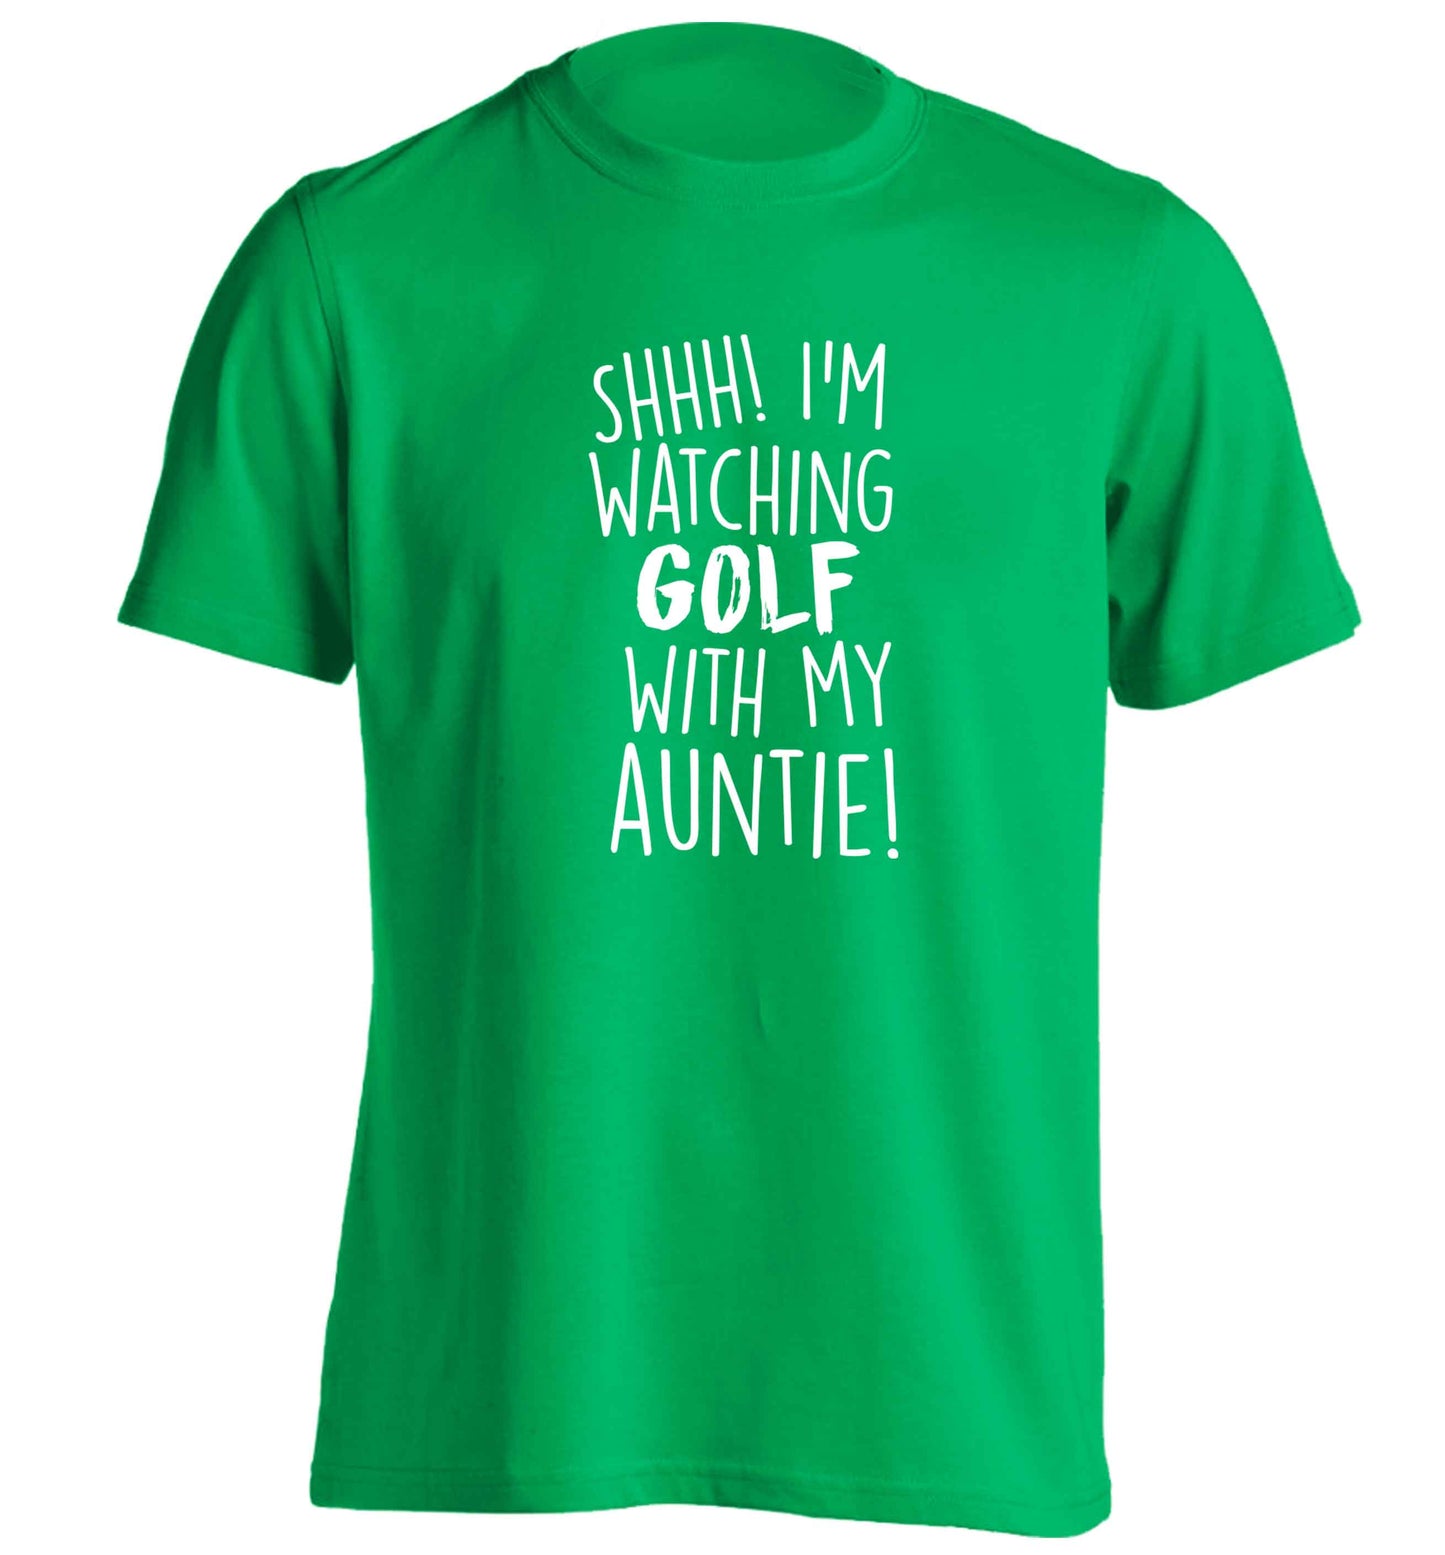 Shh I'm watching golf with my auntie adults unisex green Tshirt 2XL